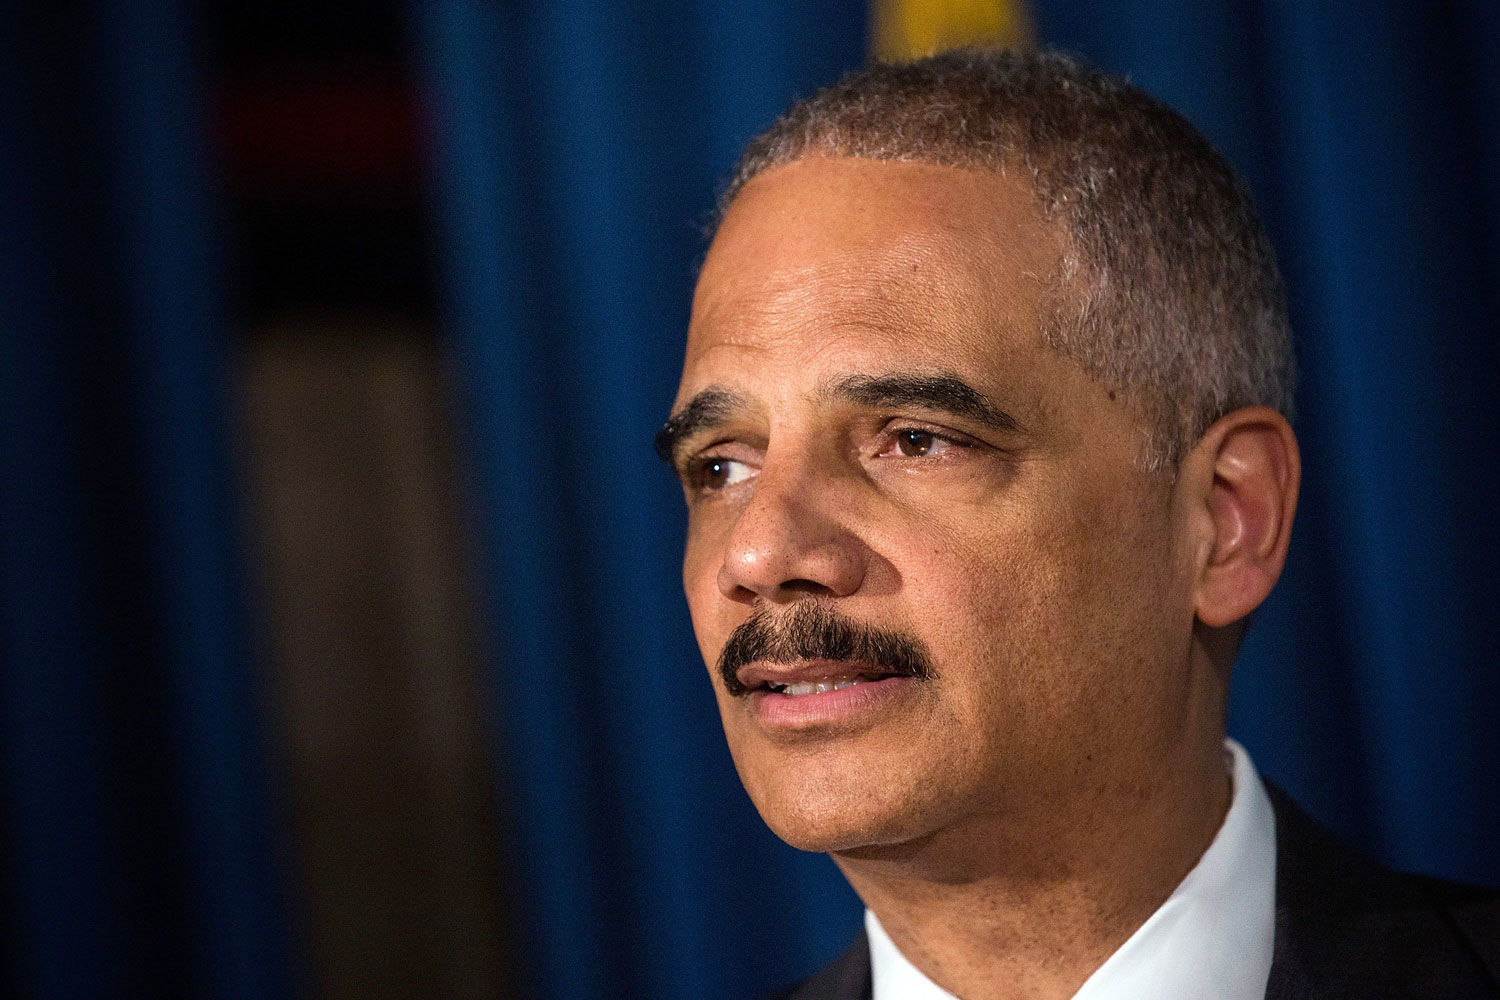 Attorney General Eric Holder speaks at a press conference on April 1, 2014 in New York.